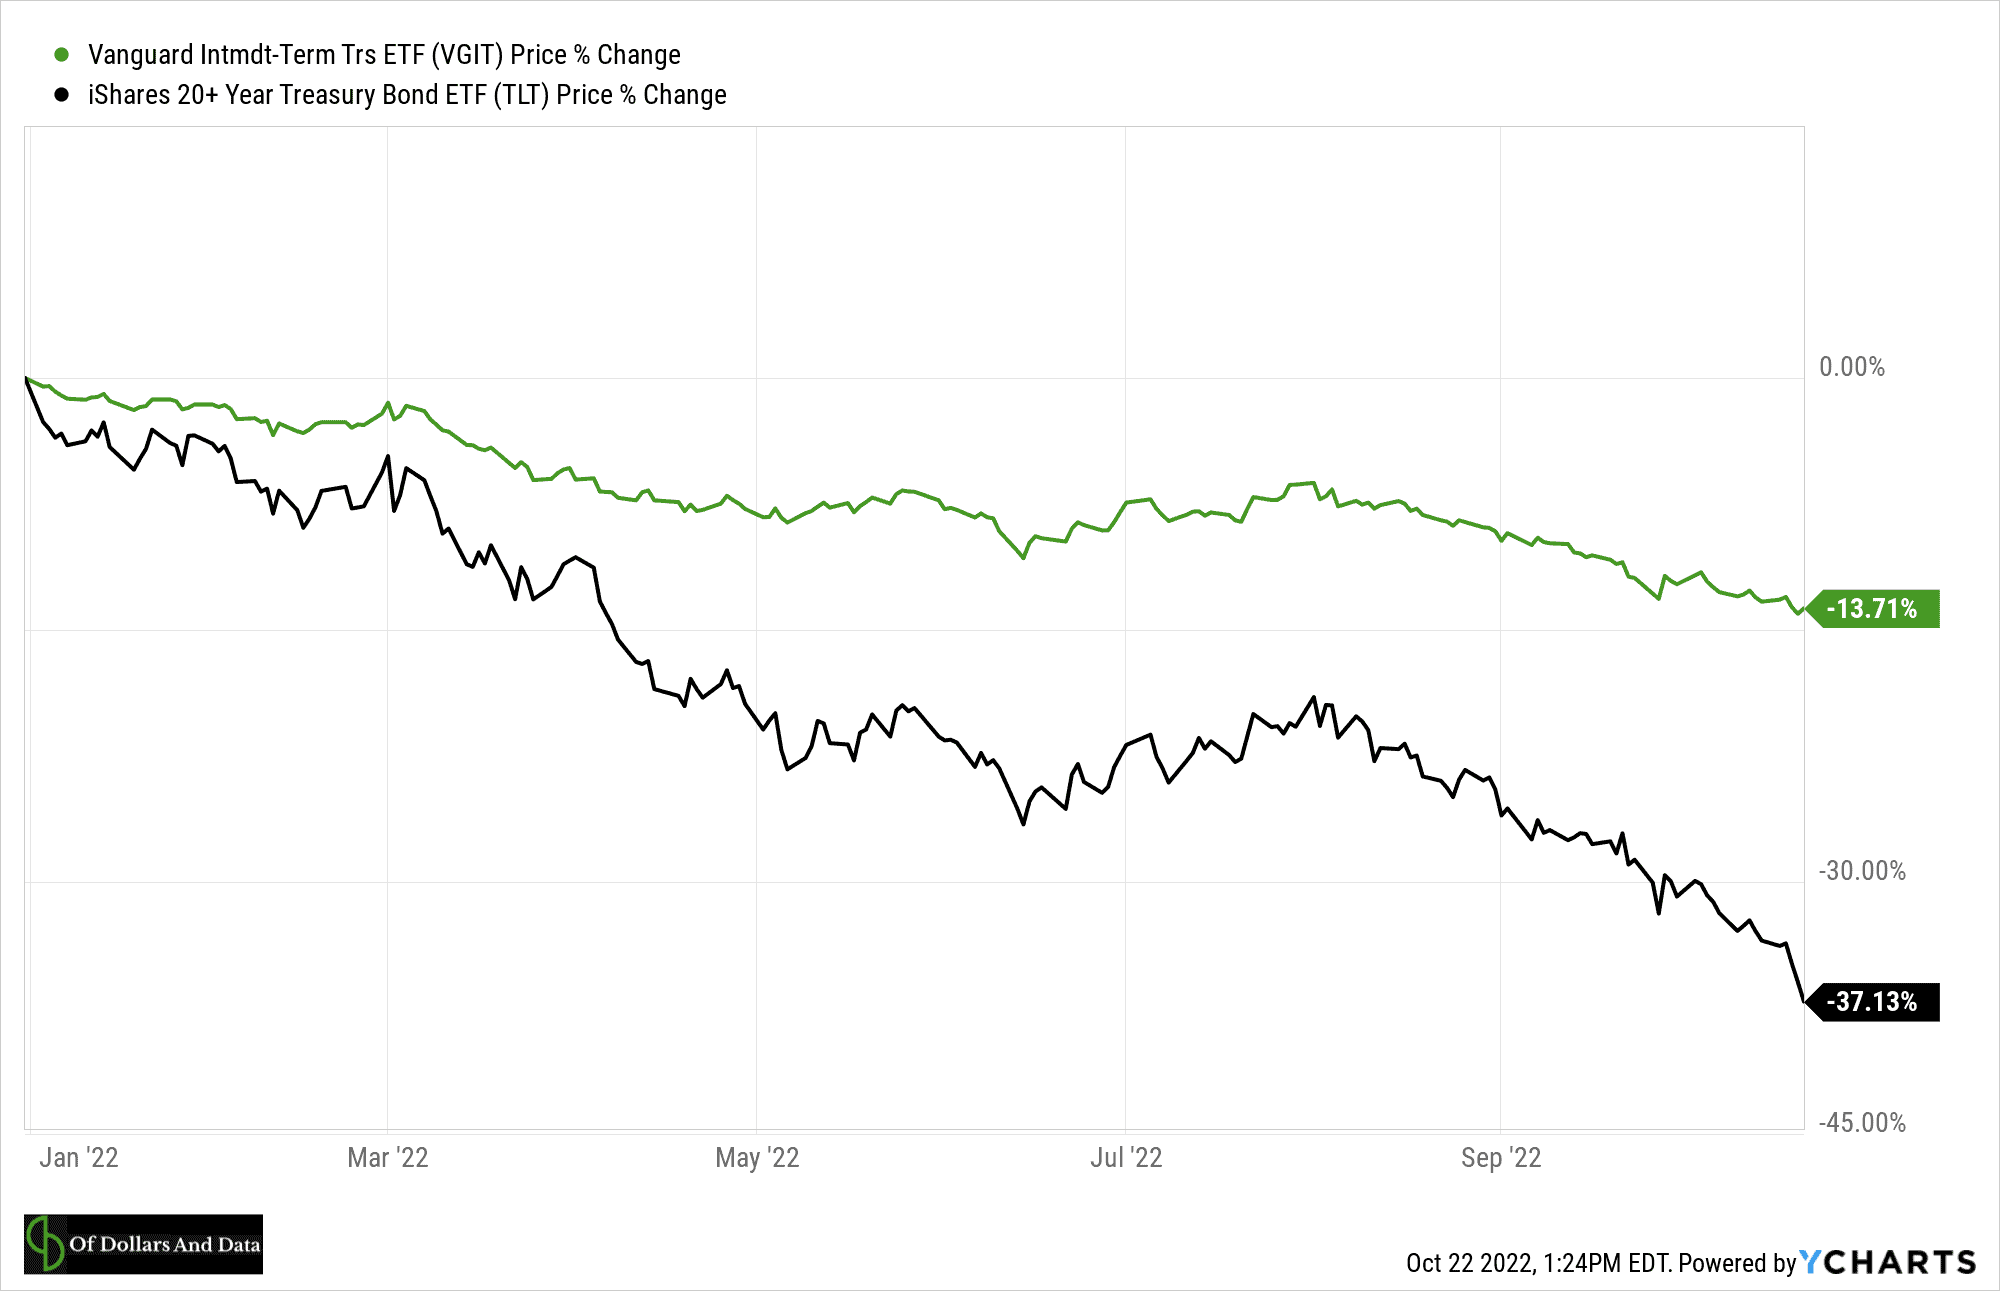 Percentage change in intermediate term and long-term Treasuries during 2022